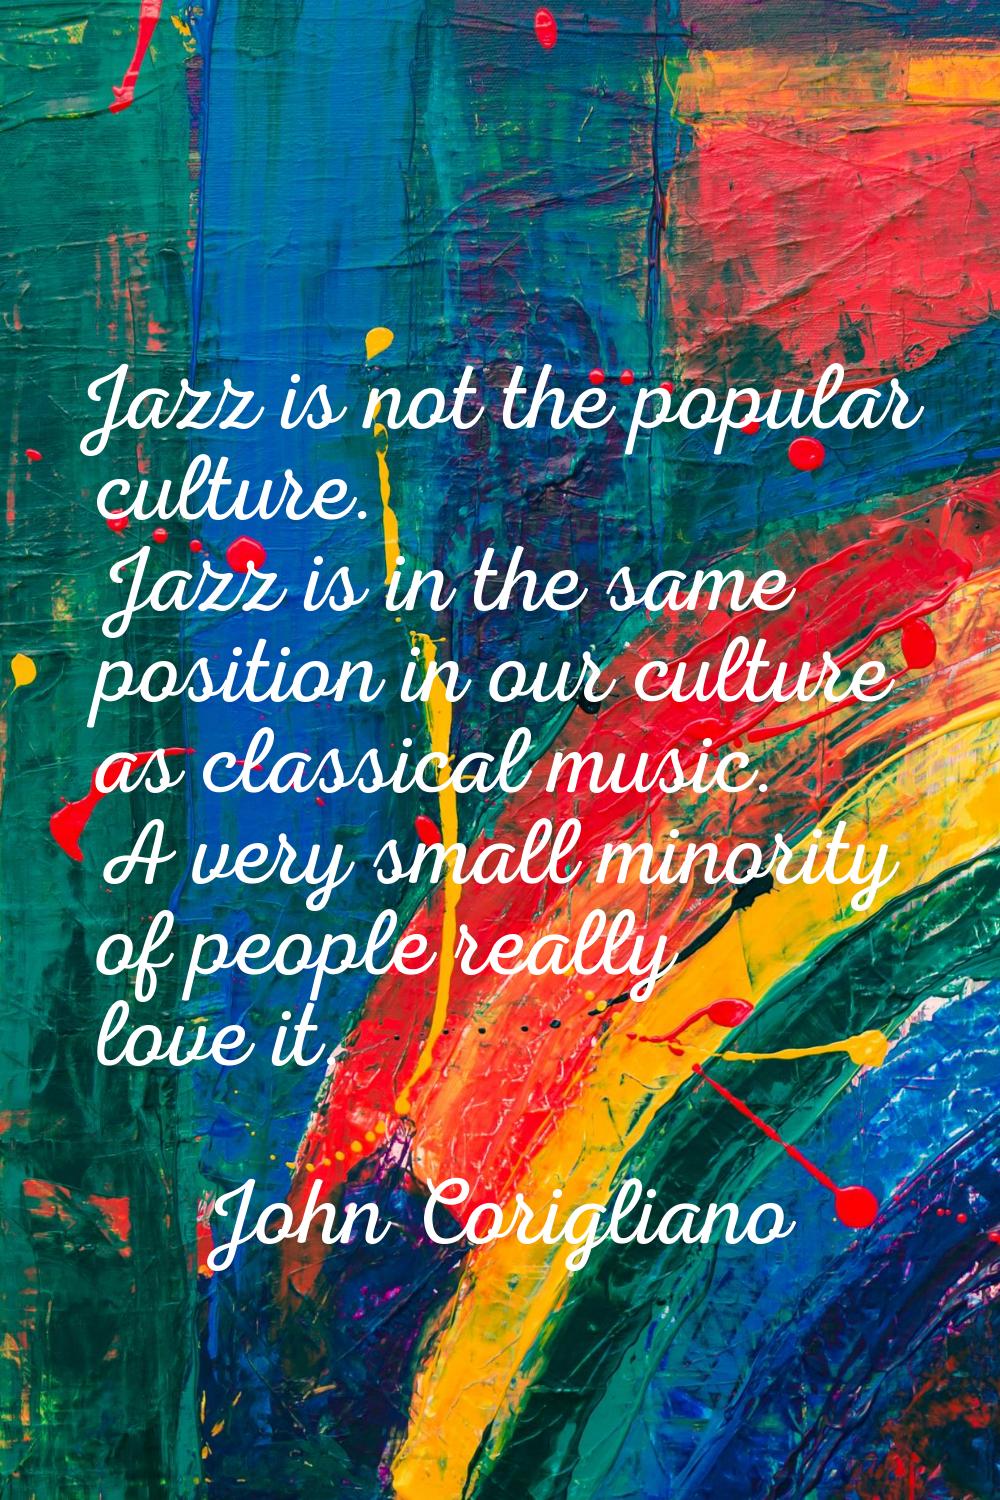 Jazz is not the popular culture. Jazz is in the same position in our culture as classical music. A 